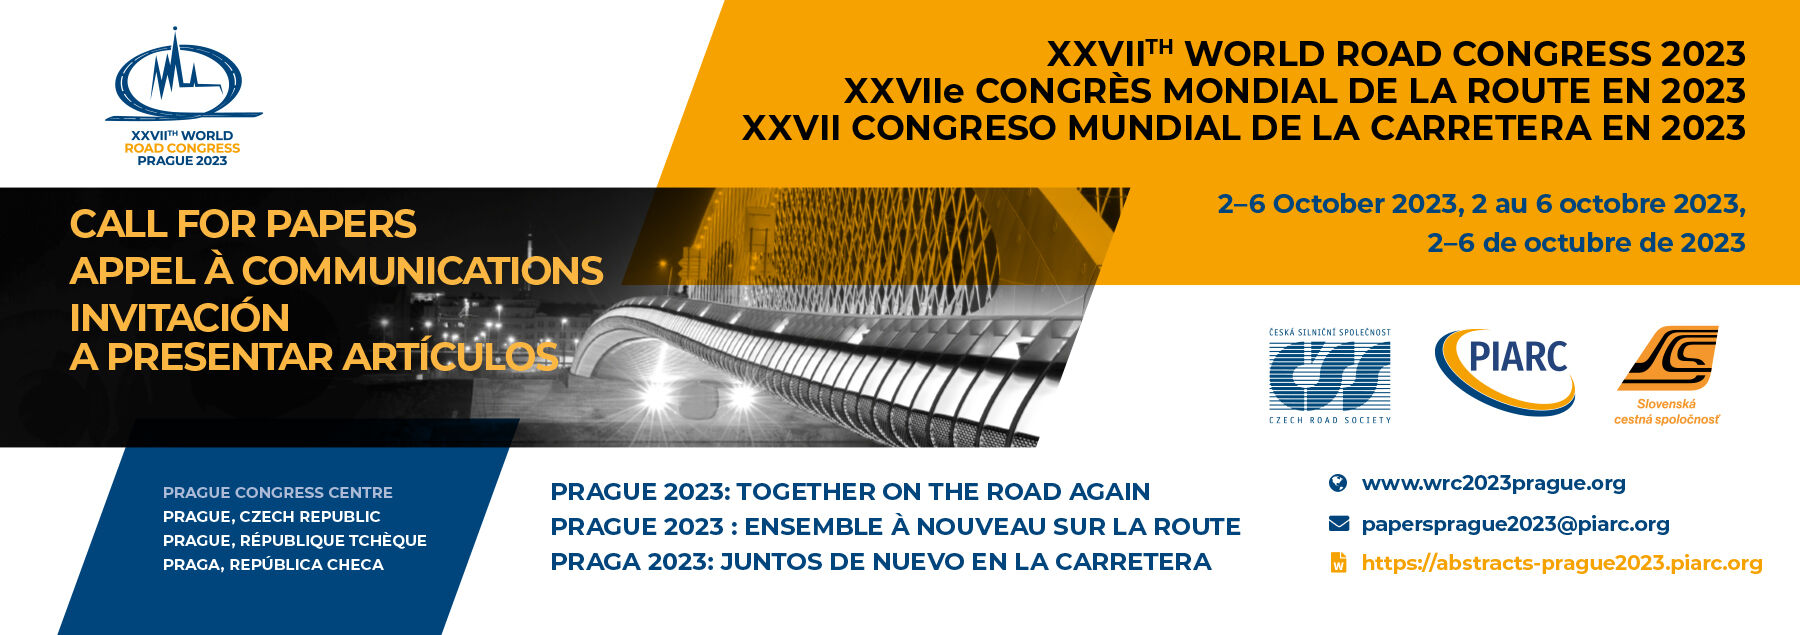 XXVII World Road Congress - Prague 2023 - Call for papers open